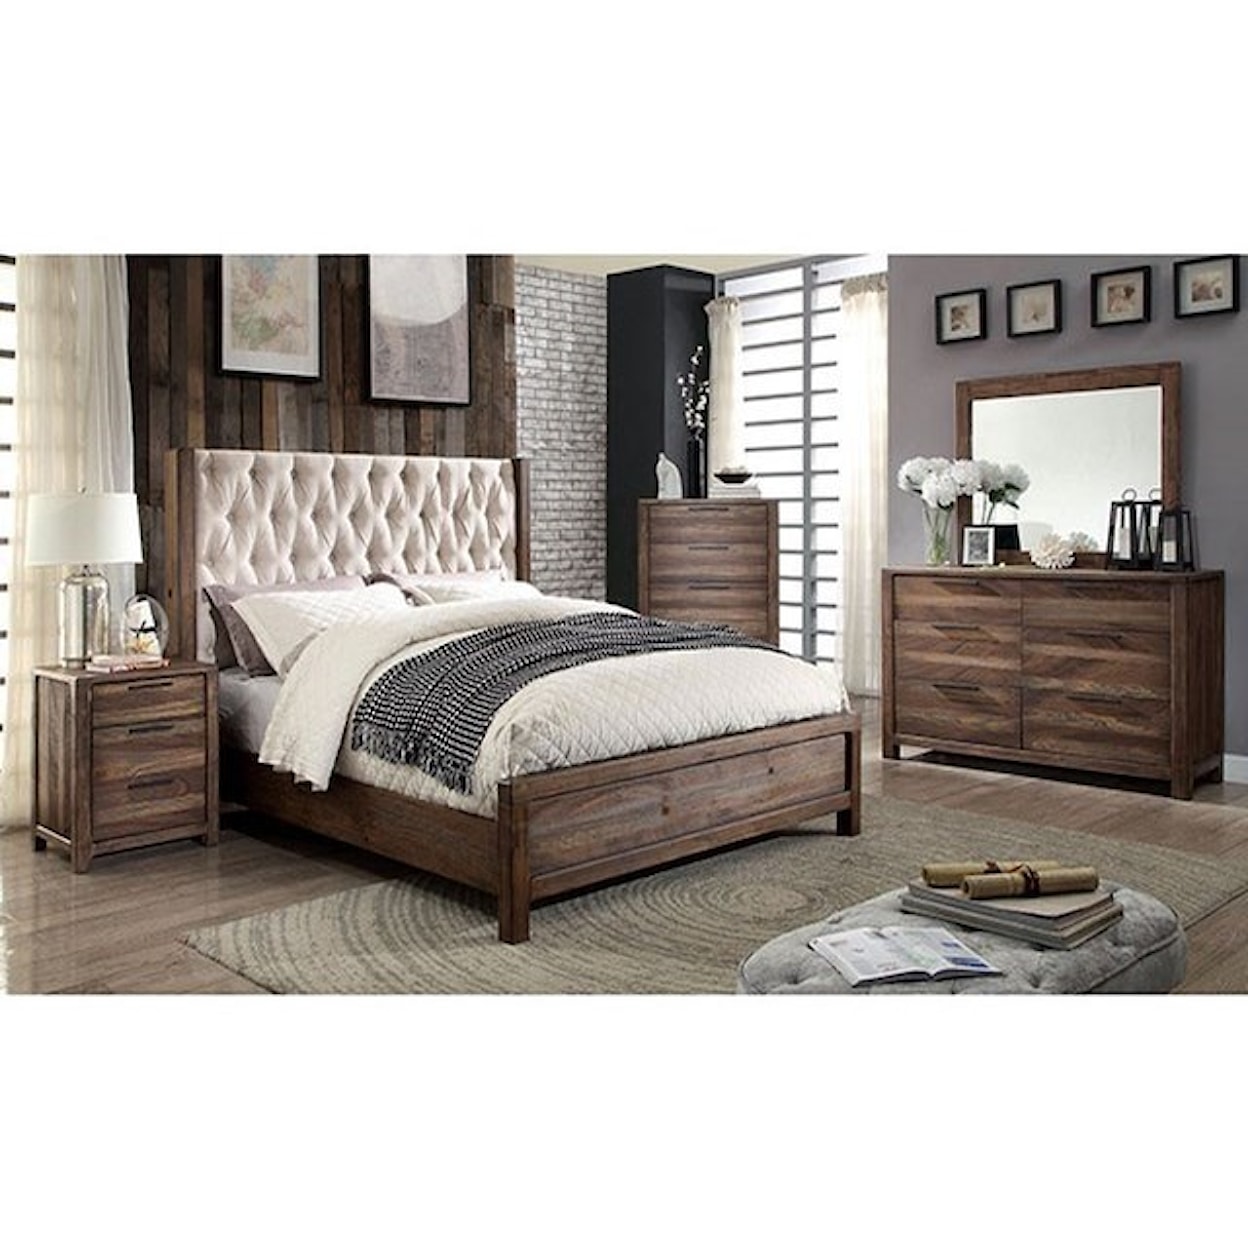 Furniture of America Hutchinson King Bed